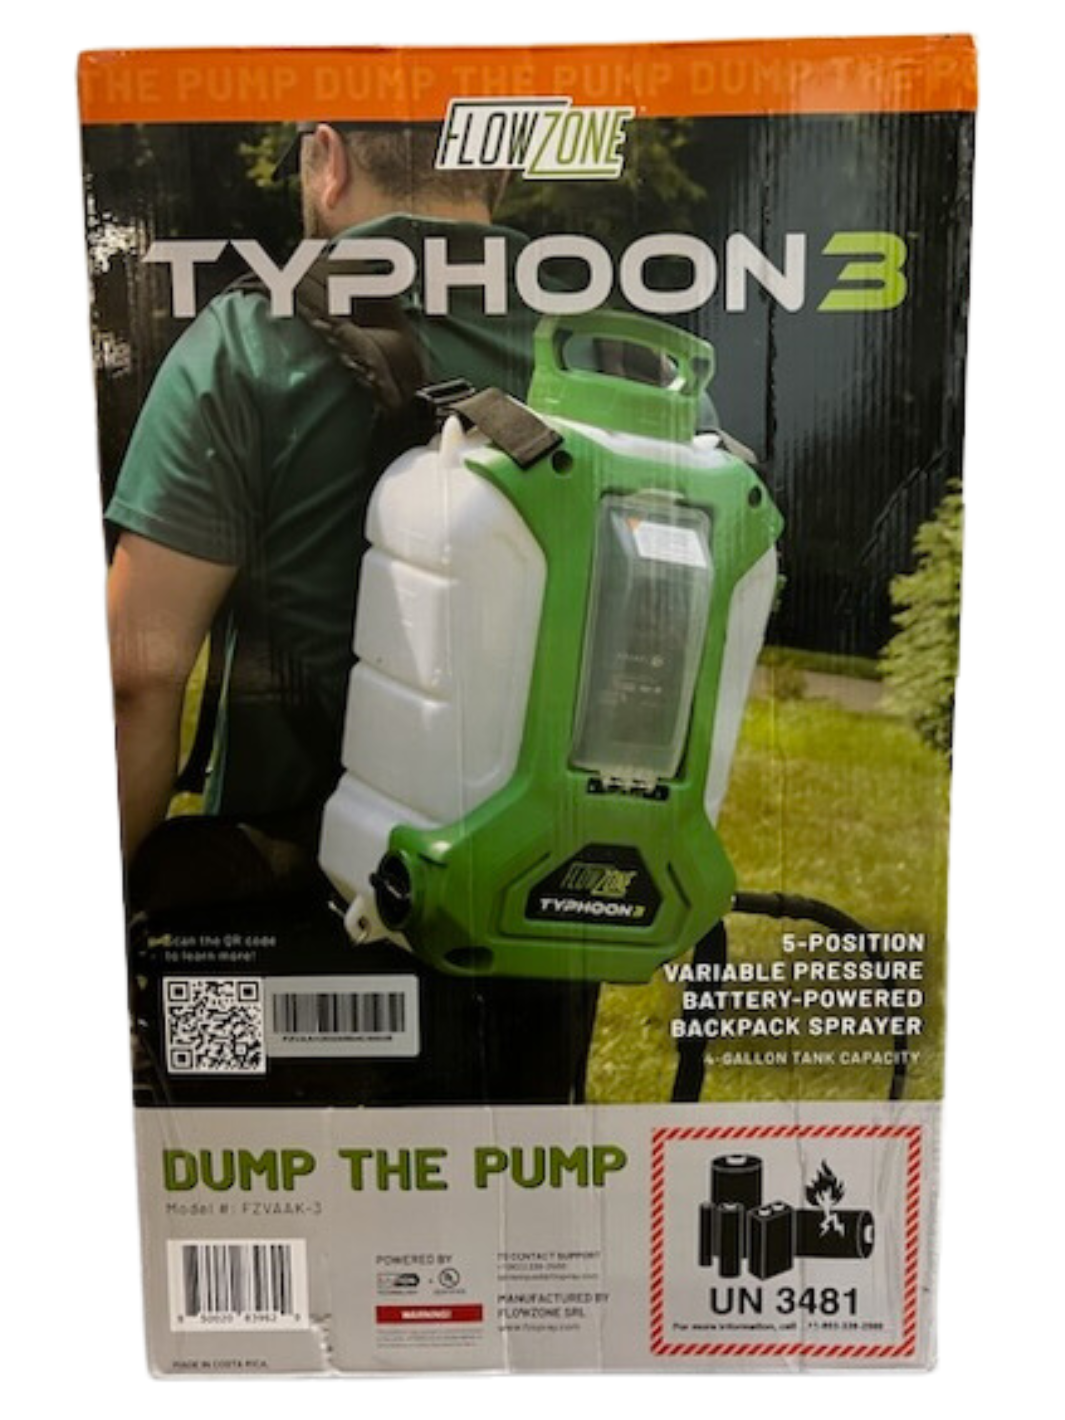 FlowZone Typhoon 3.0 Battery Operated Backpack Sprayer back side